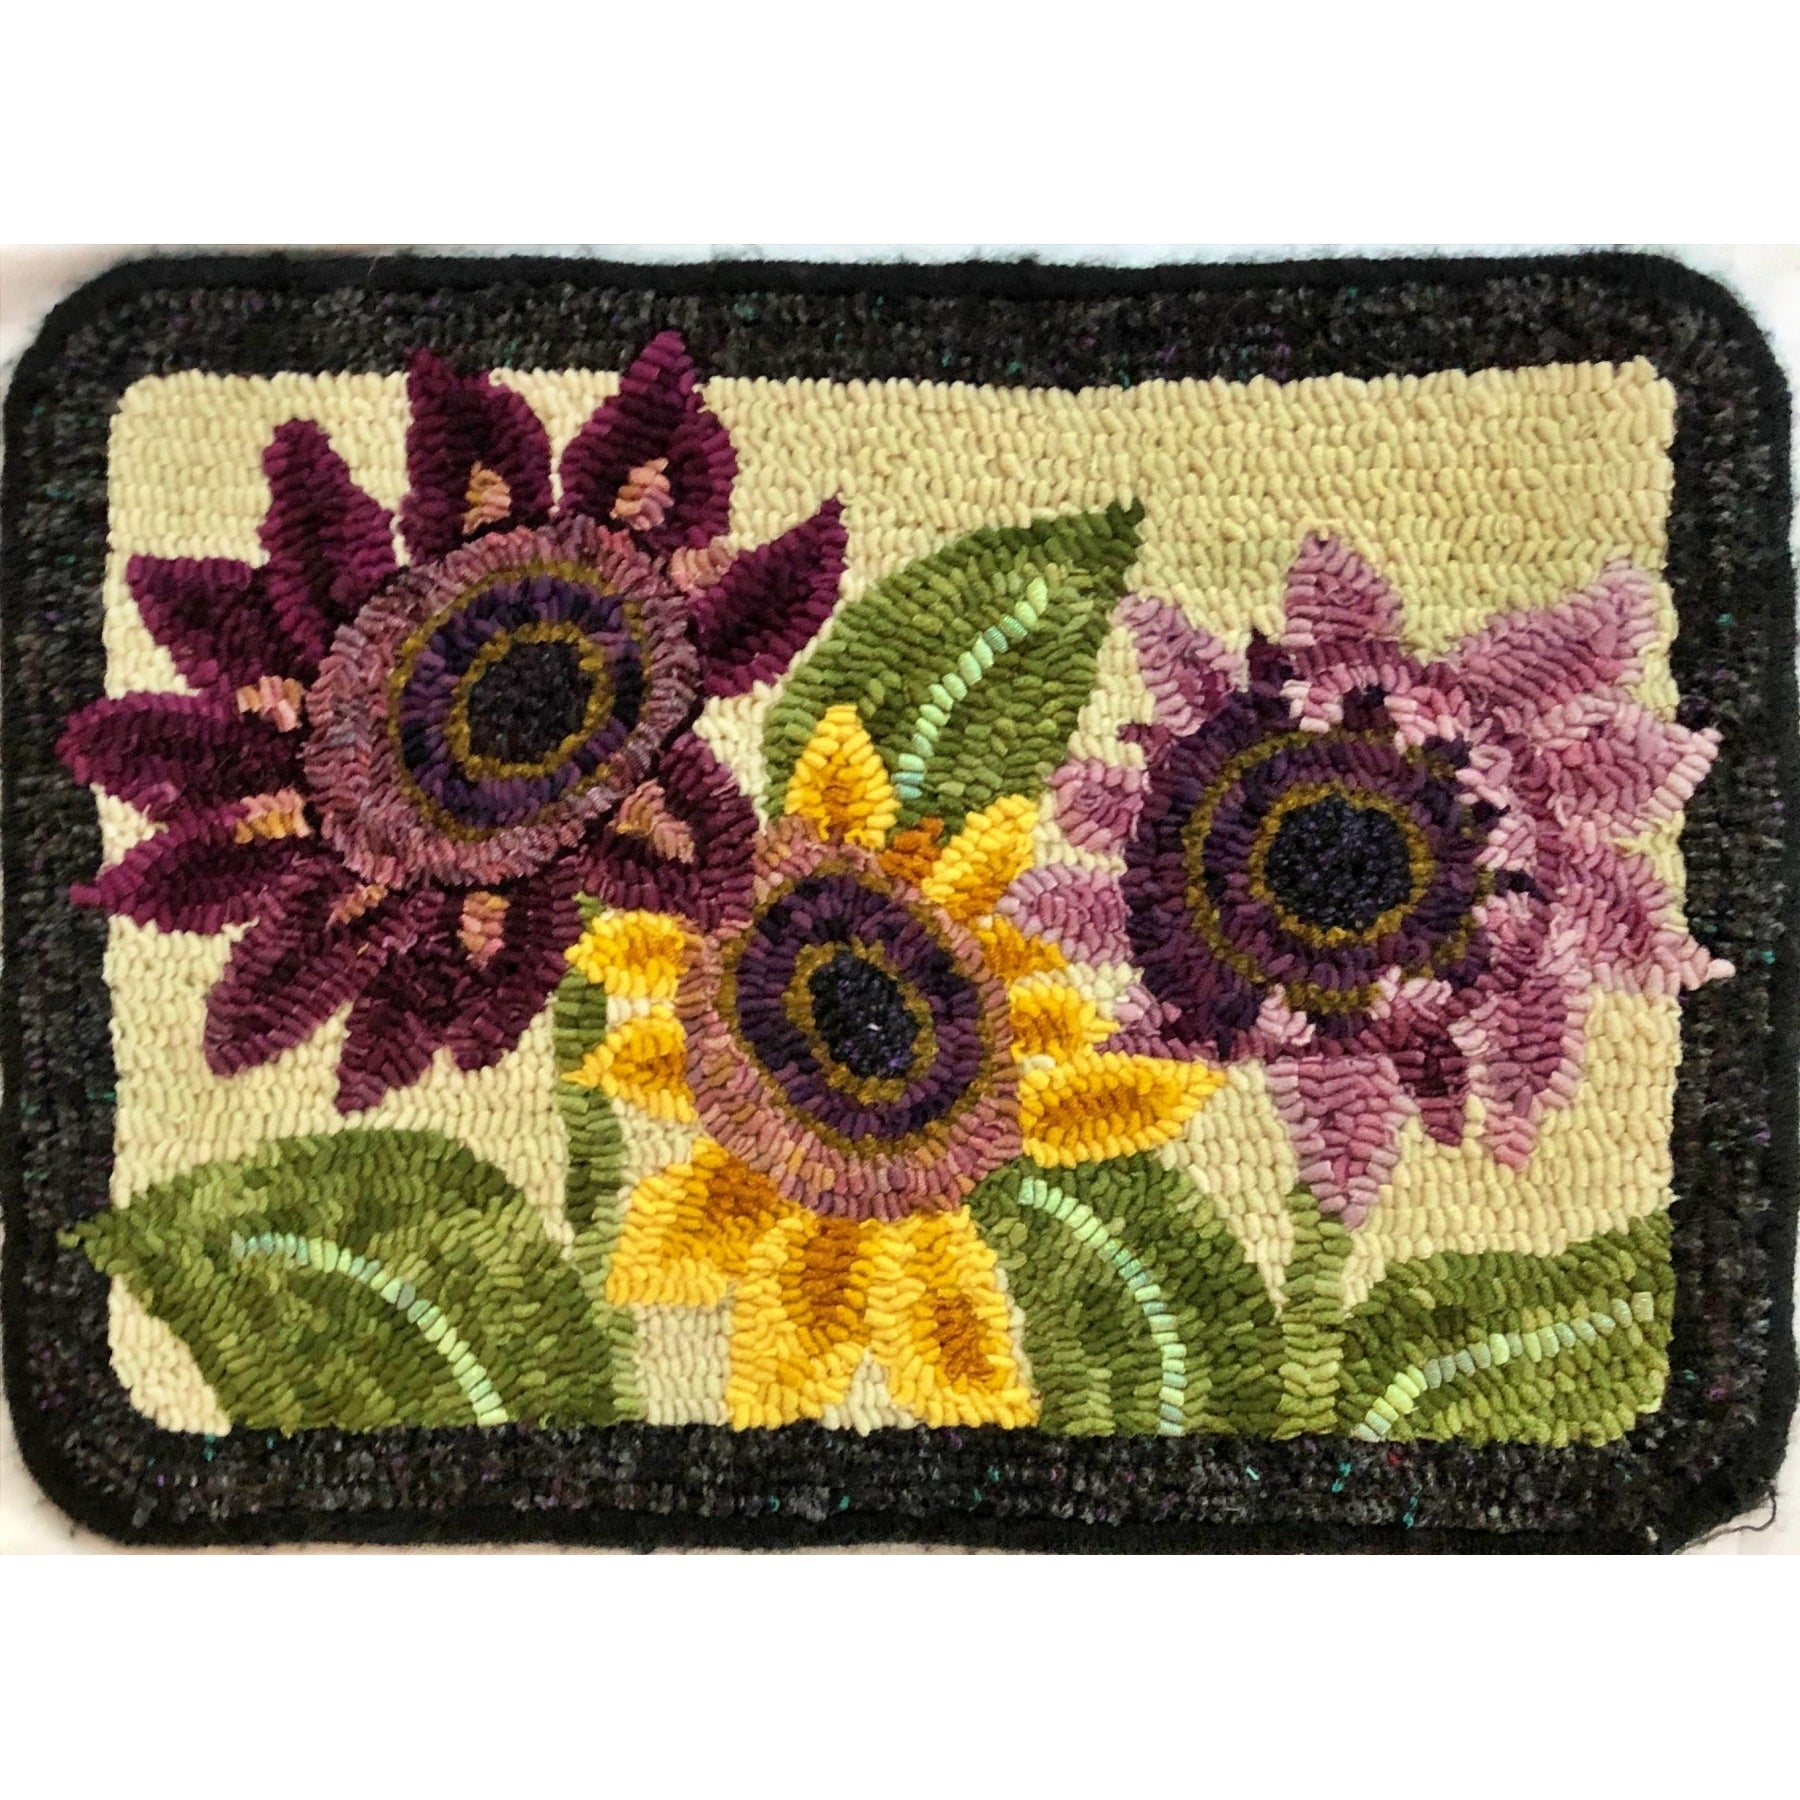 Sunflowers - Country Footstool Pattern, rug hooked by Stacey Van Dyne